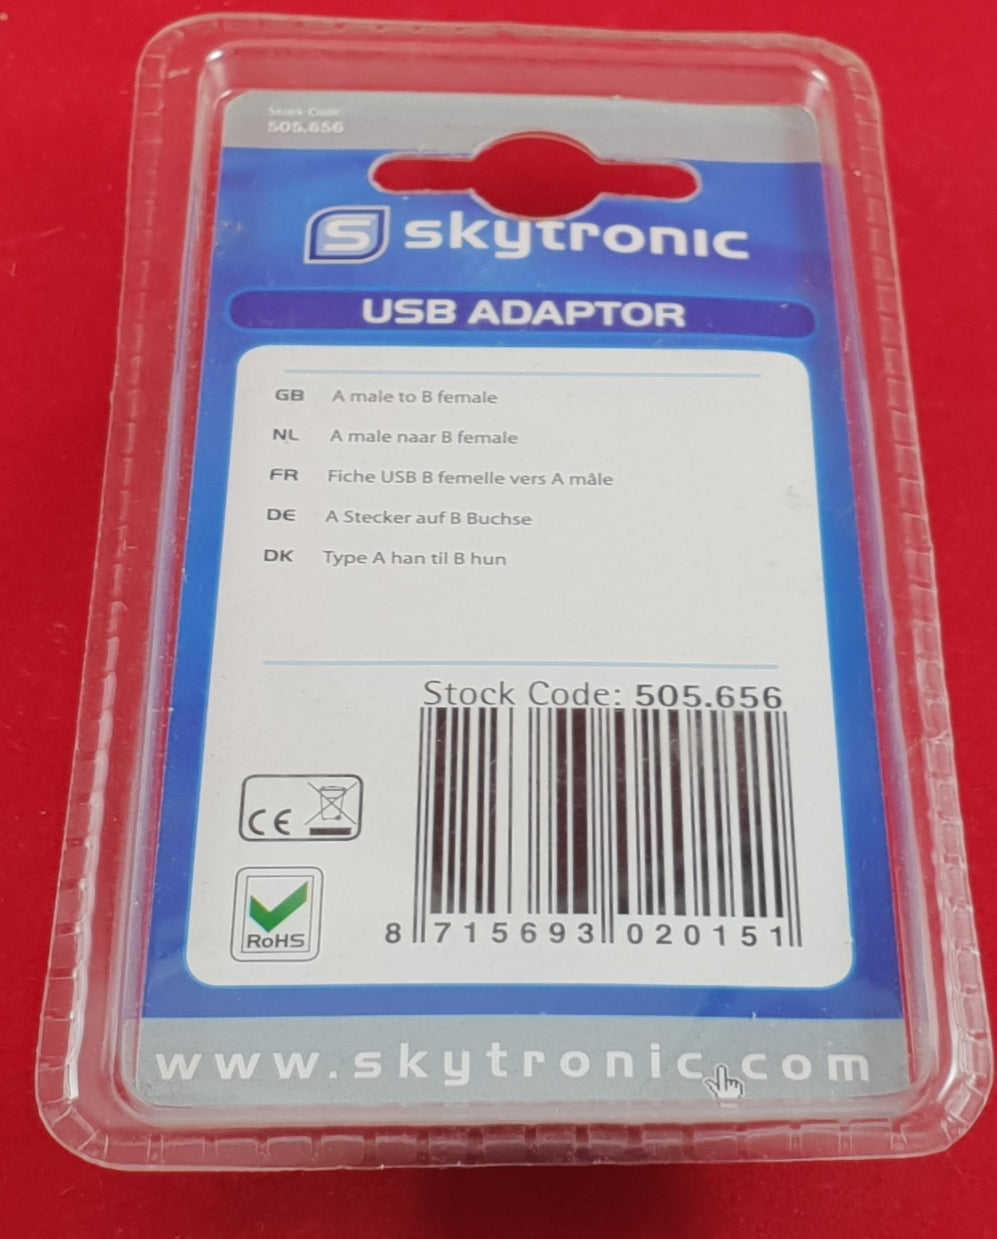 Brand New and Sealed Skytronic USB Adaptor Accessory